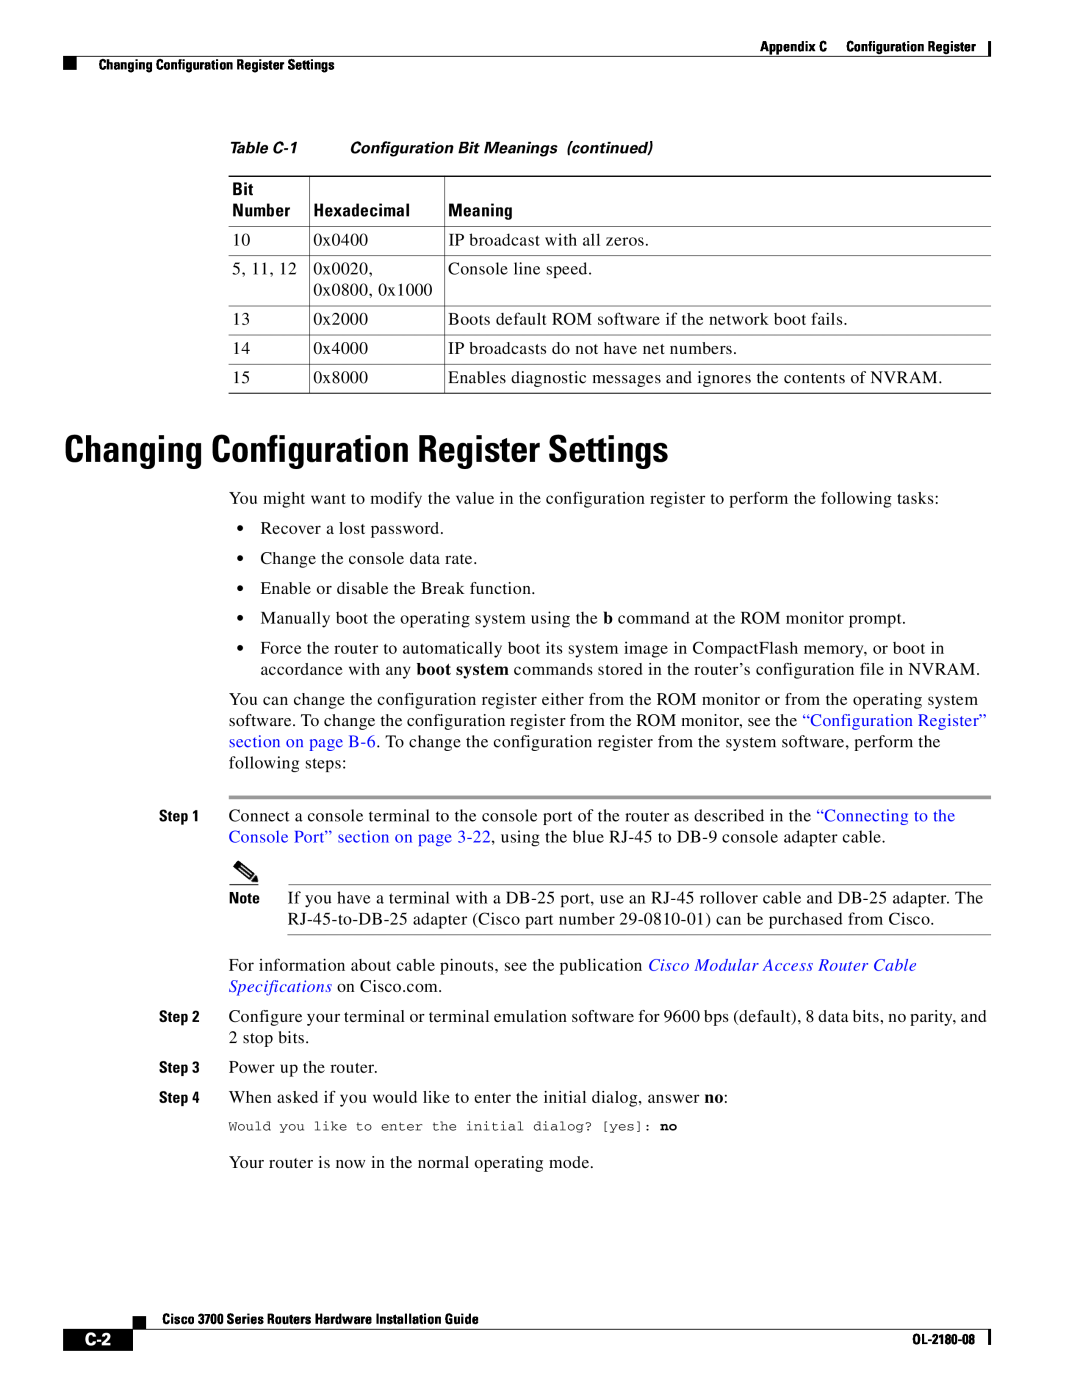 Cisco Systems 3700 Series manual Changing Configuration Register Settings 